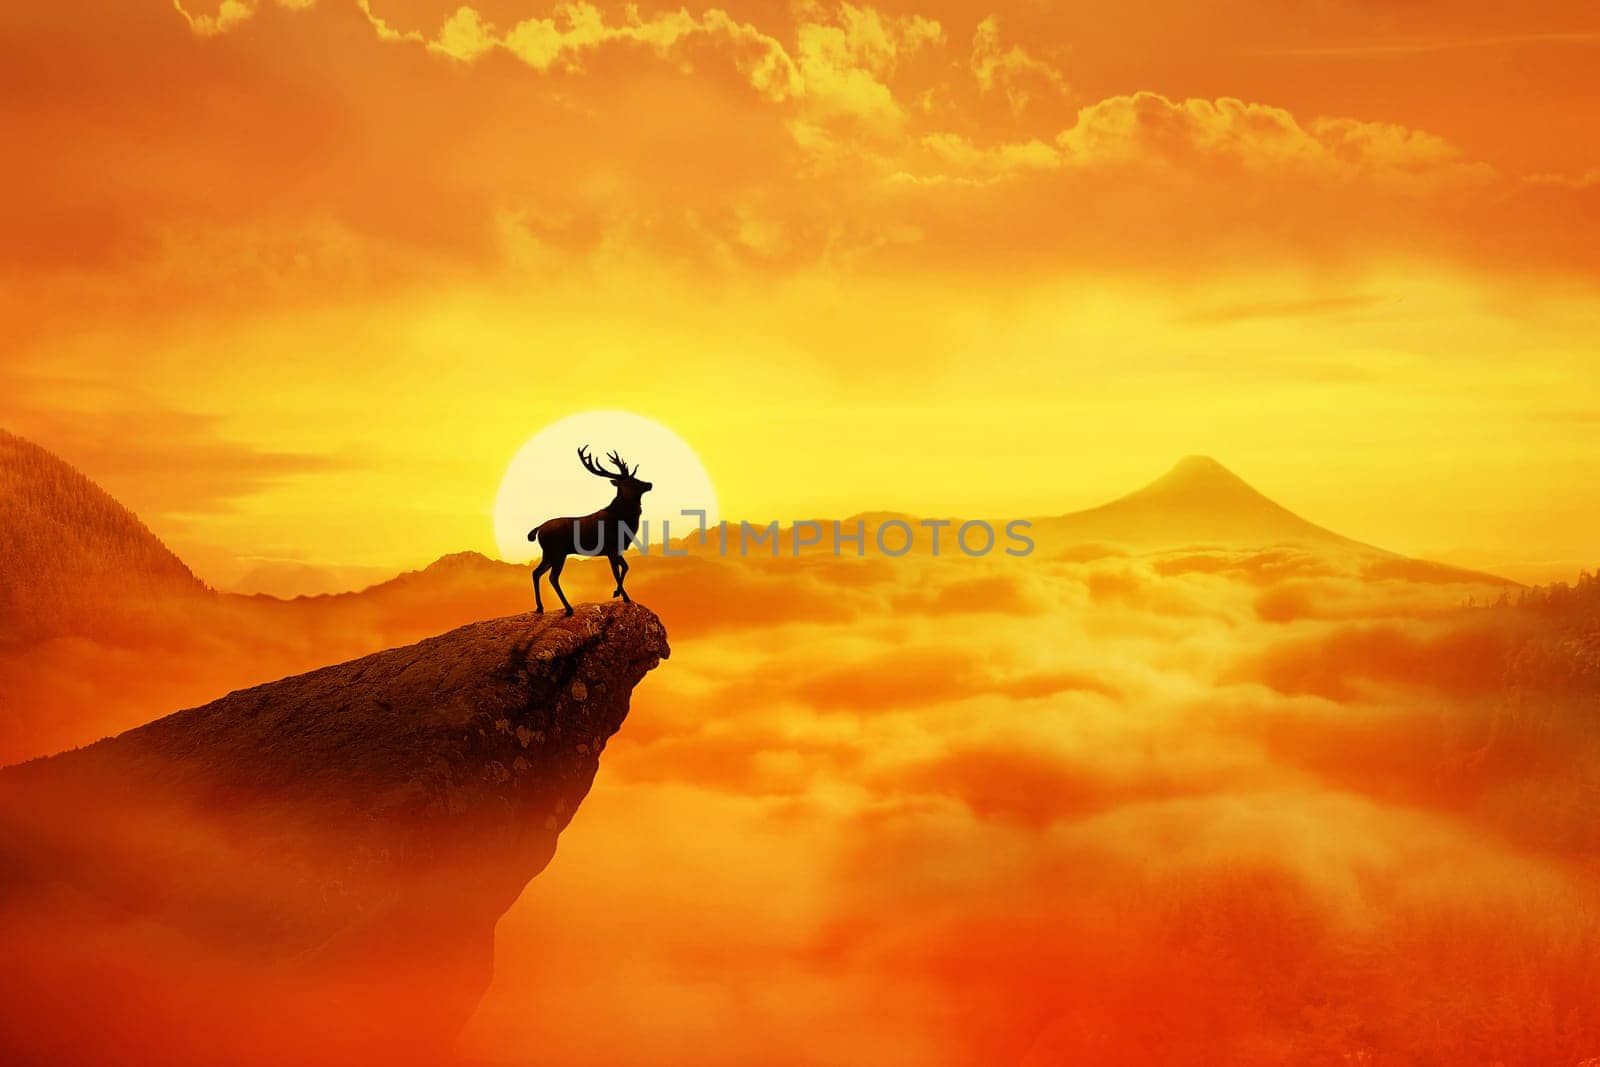 Silhouette of a lonely deer with long horns standing on a cliff against orange sunset. Dusk sky over the clouds in the mountains. Wild life landscape scene screen saver